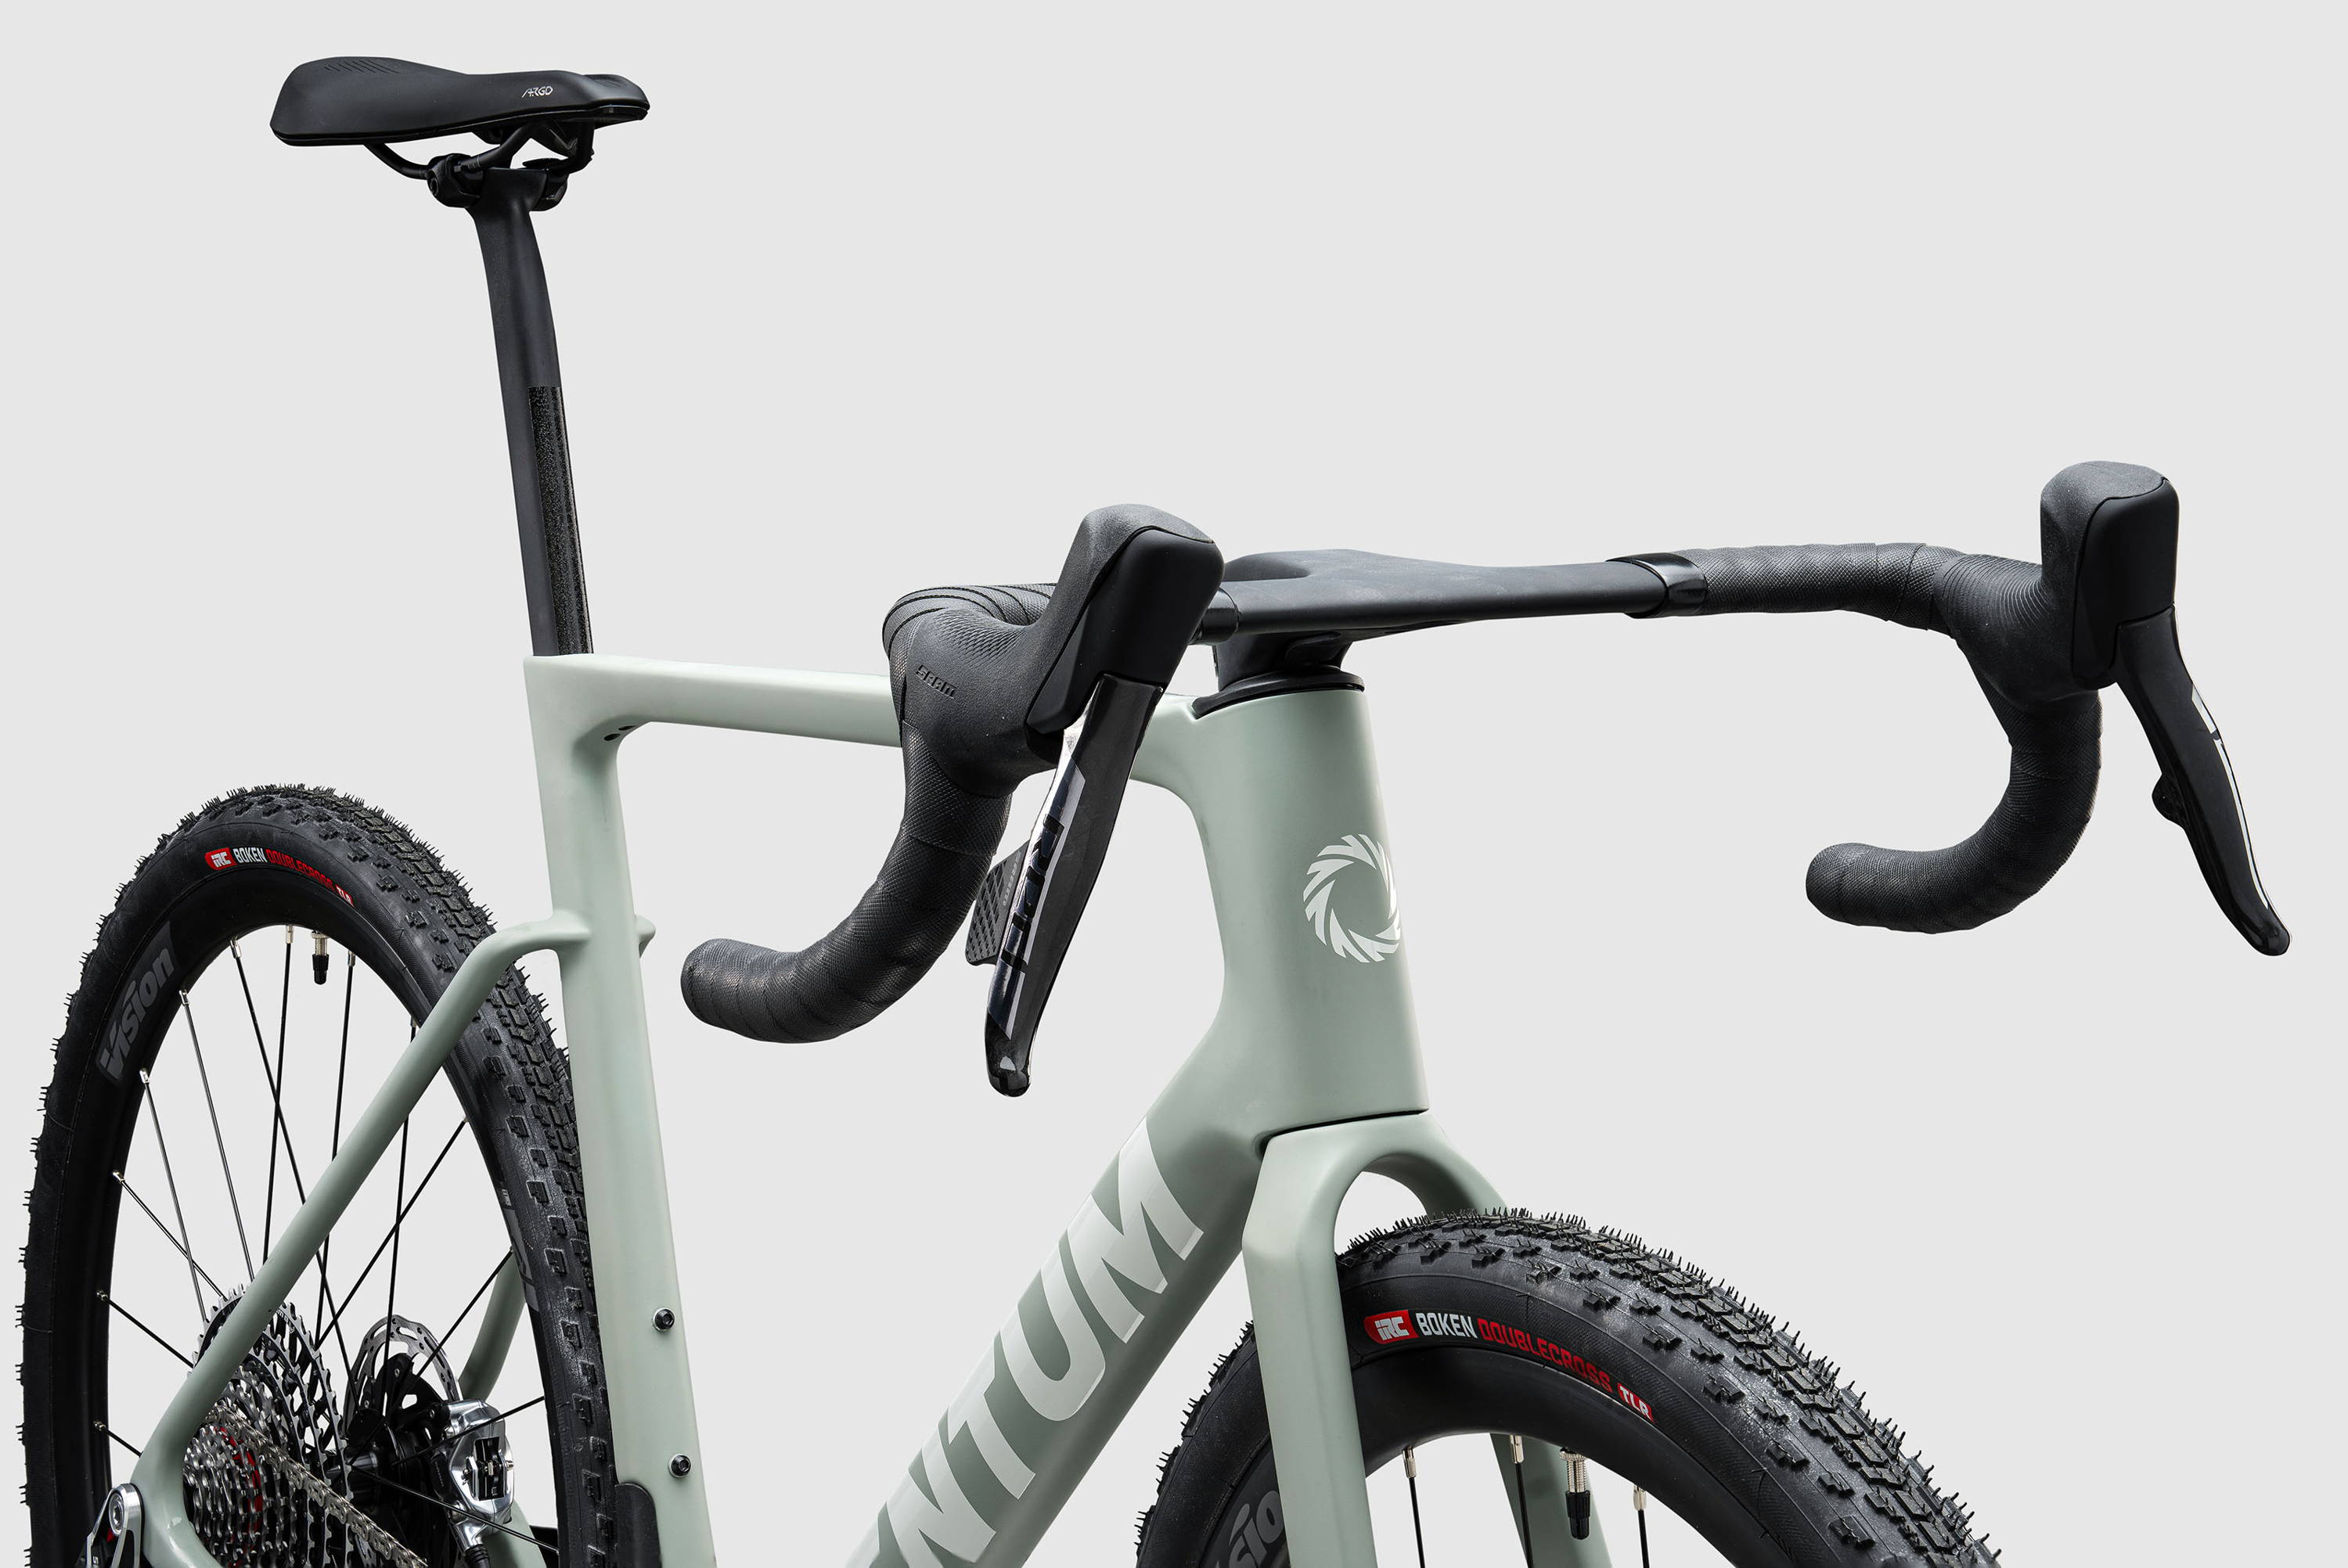 The CR5 one-piece handlebar was specifically designed for the Ventum GS1 gravel bike. 